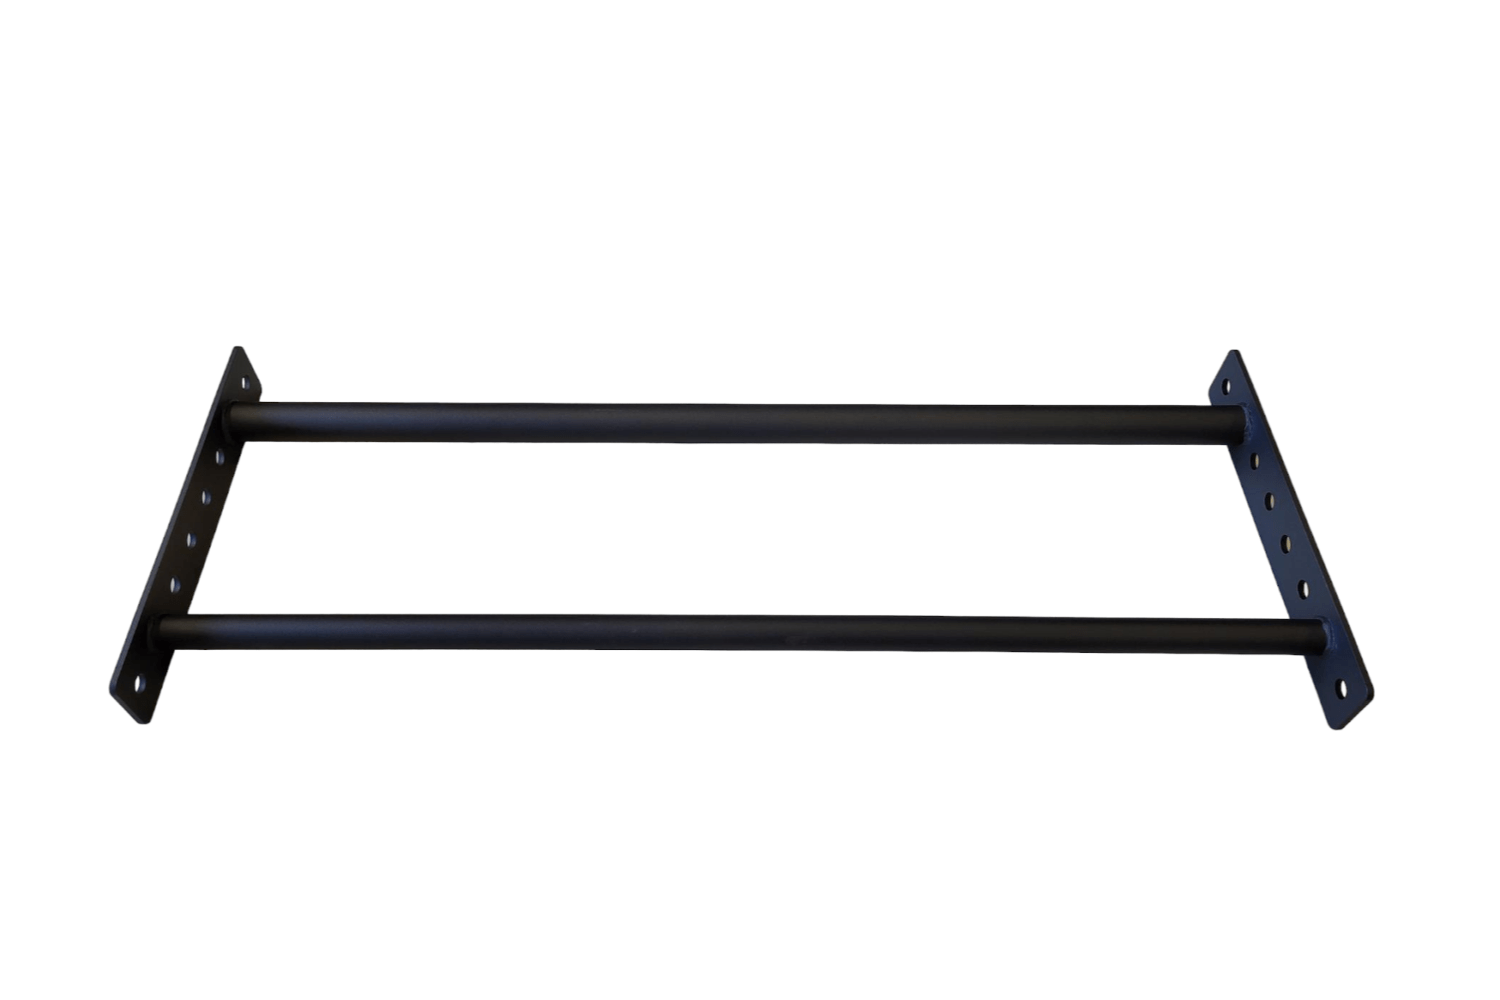 Progression Rig 4 FT Double Parallel Bars-4 FT Double Rig Bar-Progression Fitness-2